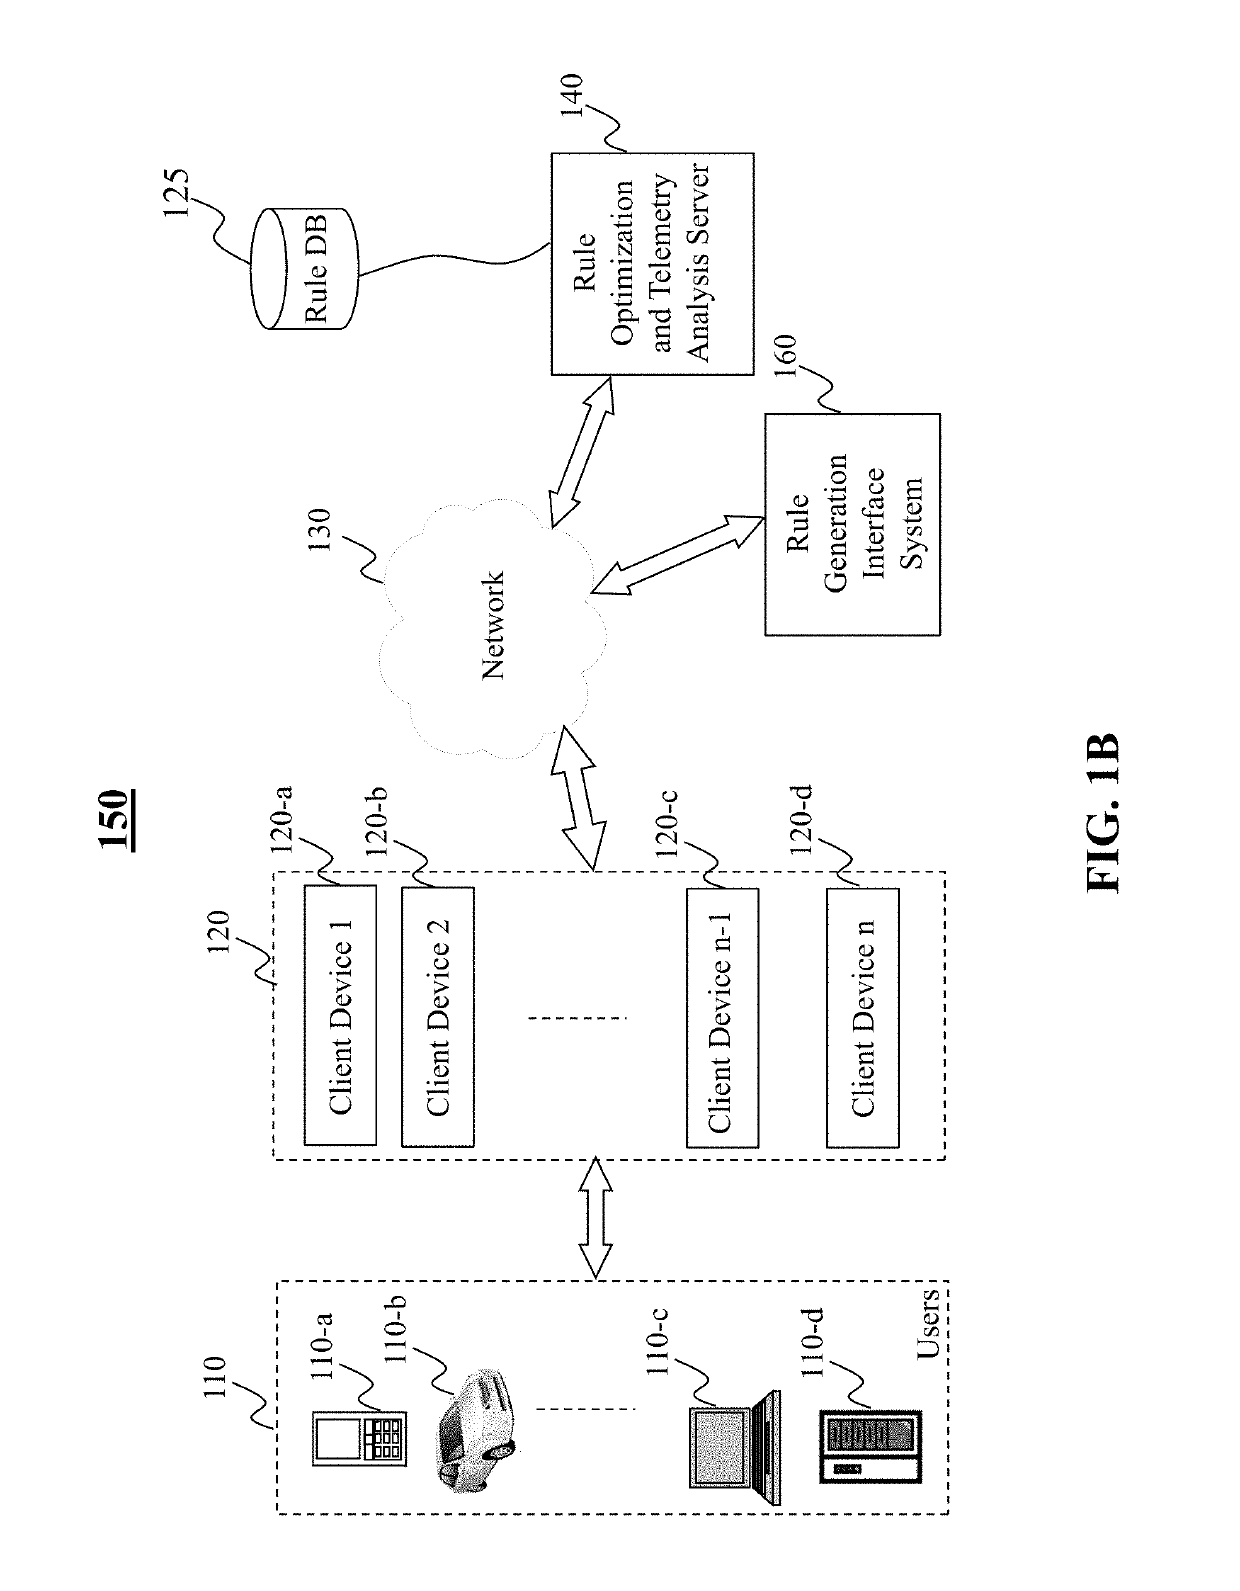 Method and system for intrusion detection and prevention